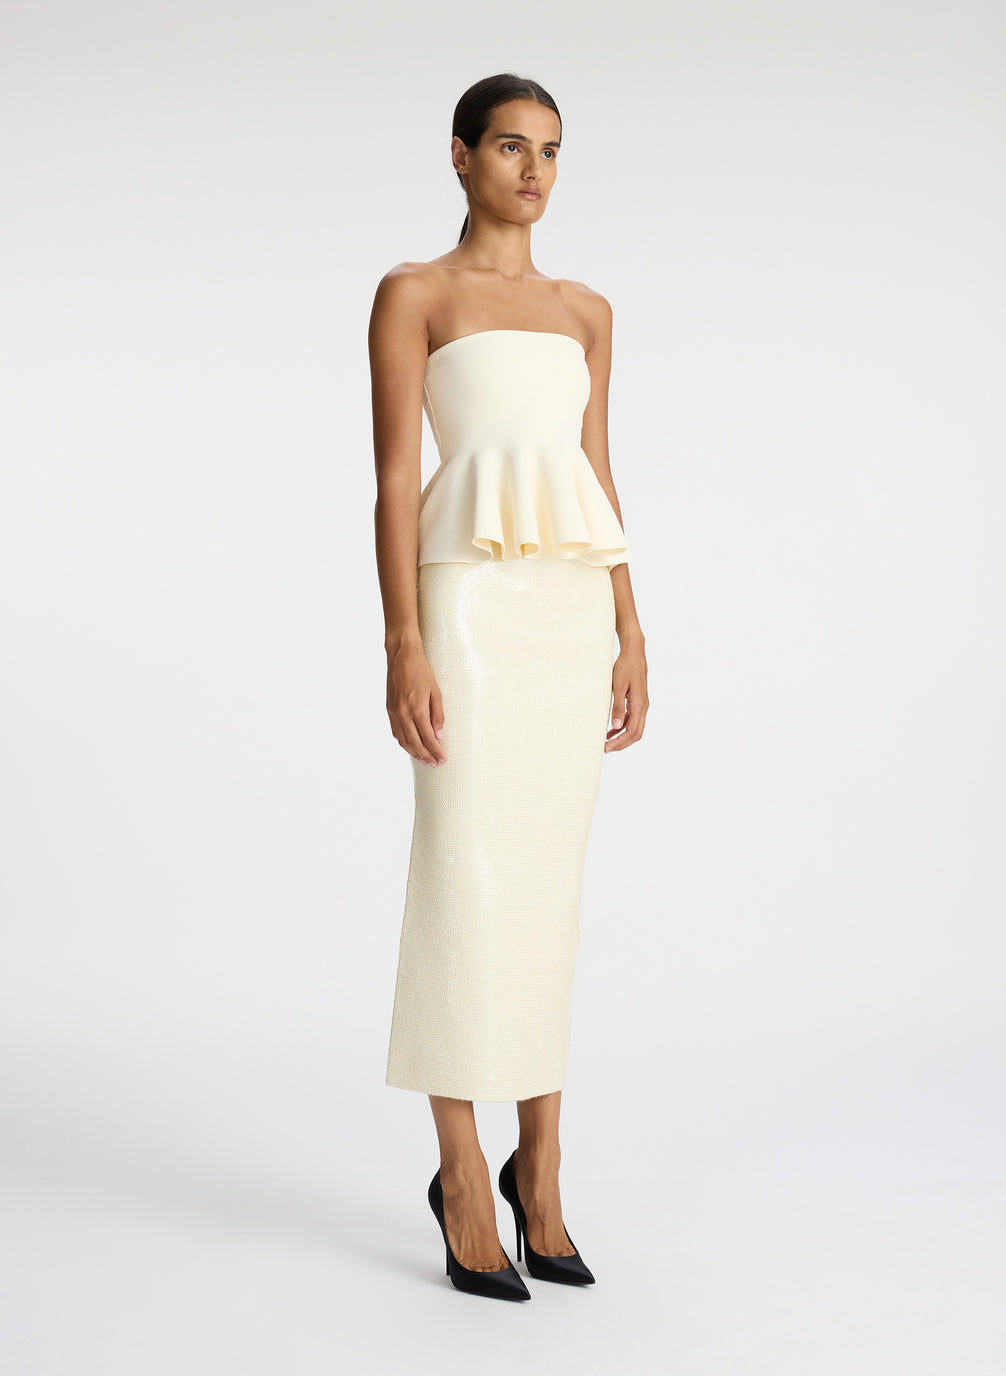 side view of woman wearing cream strapless peplum top and cream sequined midi skirt